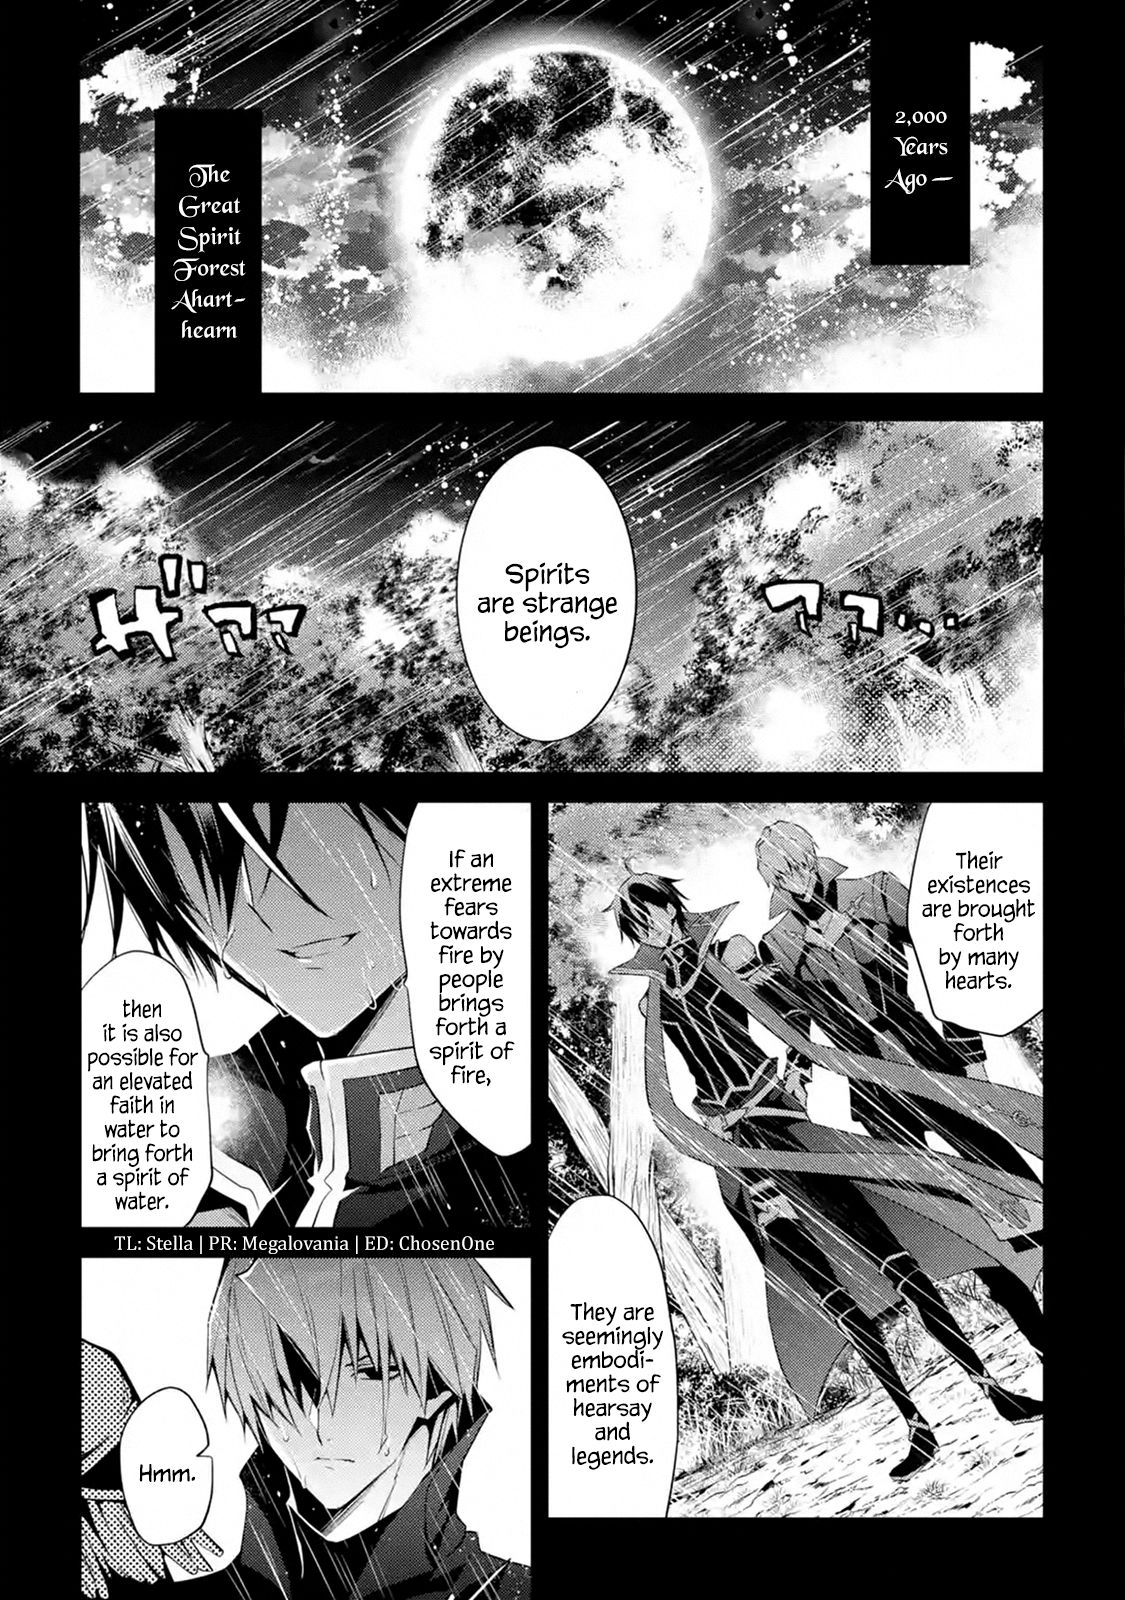 Demon King Mismatched School ~The Founder of the Strongest Demon King in History, He Arrives at School as Descendants After Reincarnating~ - chapter 13.1 - #1